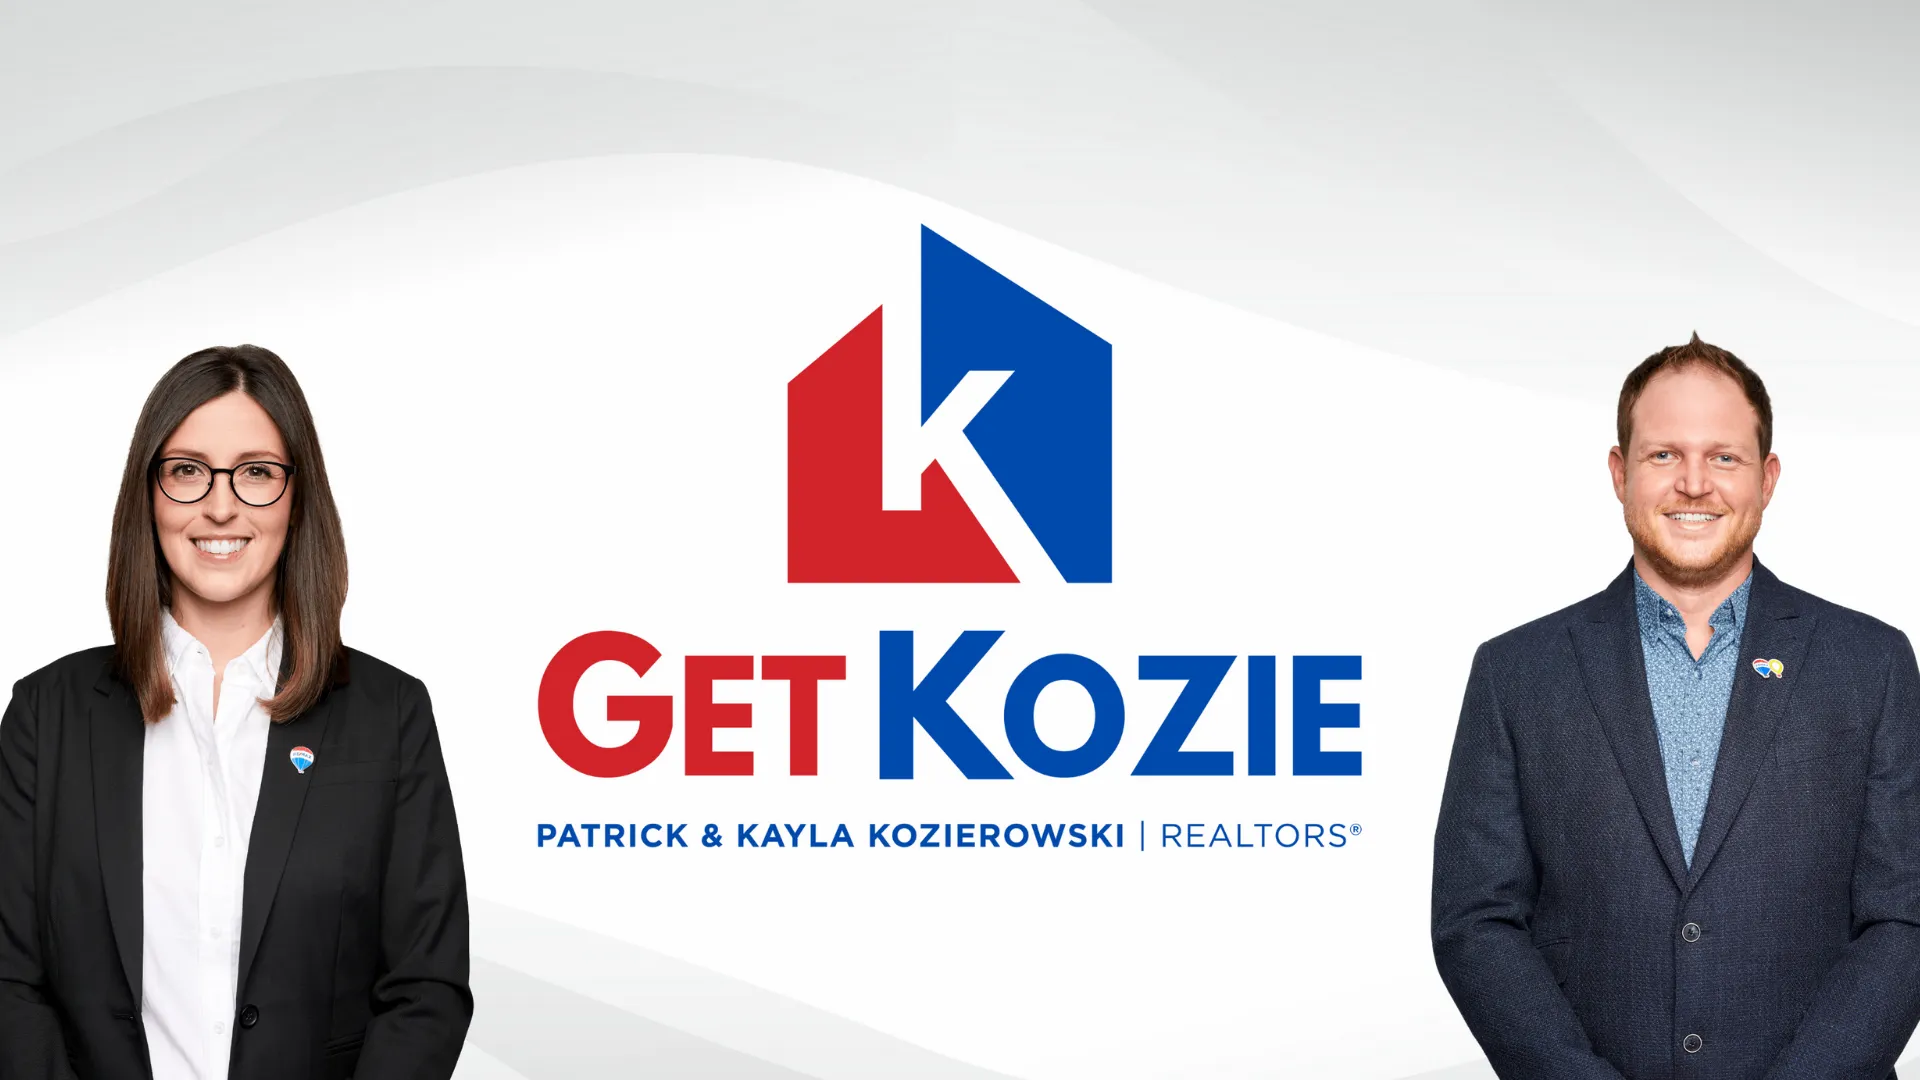 In this professional portrait, a dynamic husband and wife real estate team, Patrick and Kayla Kozierowski of ReMax Superstars, stand side by side, exuding confidence and warmth. Both are elegantly dressed in business attire, projecting a polished and approachable image. Patrick, on the left, wears a tailored suit with a ReMax lapel pin, while Kayla, on the right, dons a chic business dress, complementing their professional appearance.